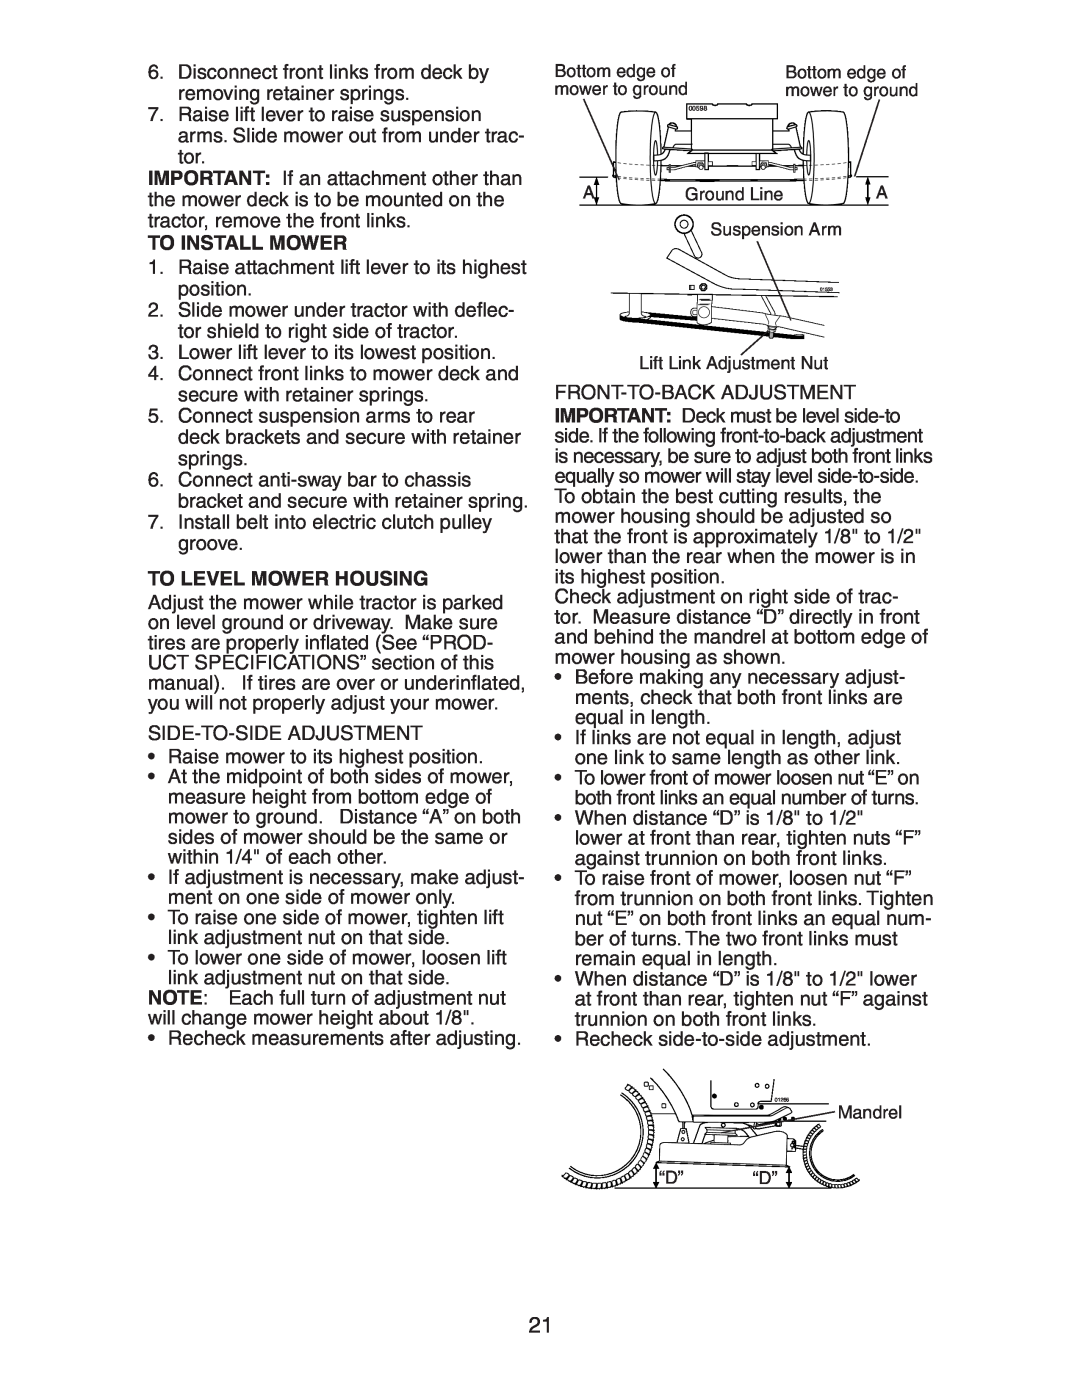 Poulan CO18542STB manual To Install Mower, To Level Mower Housing 